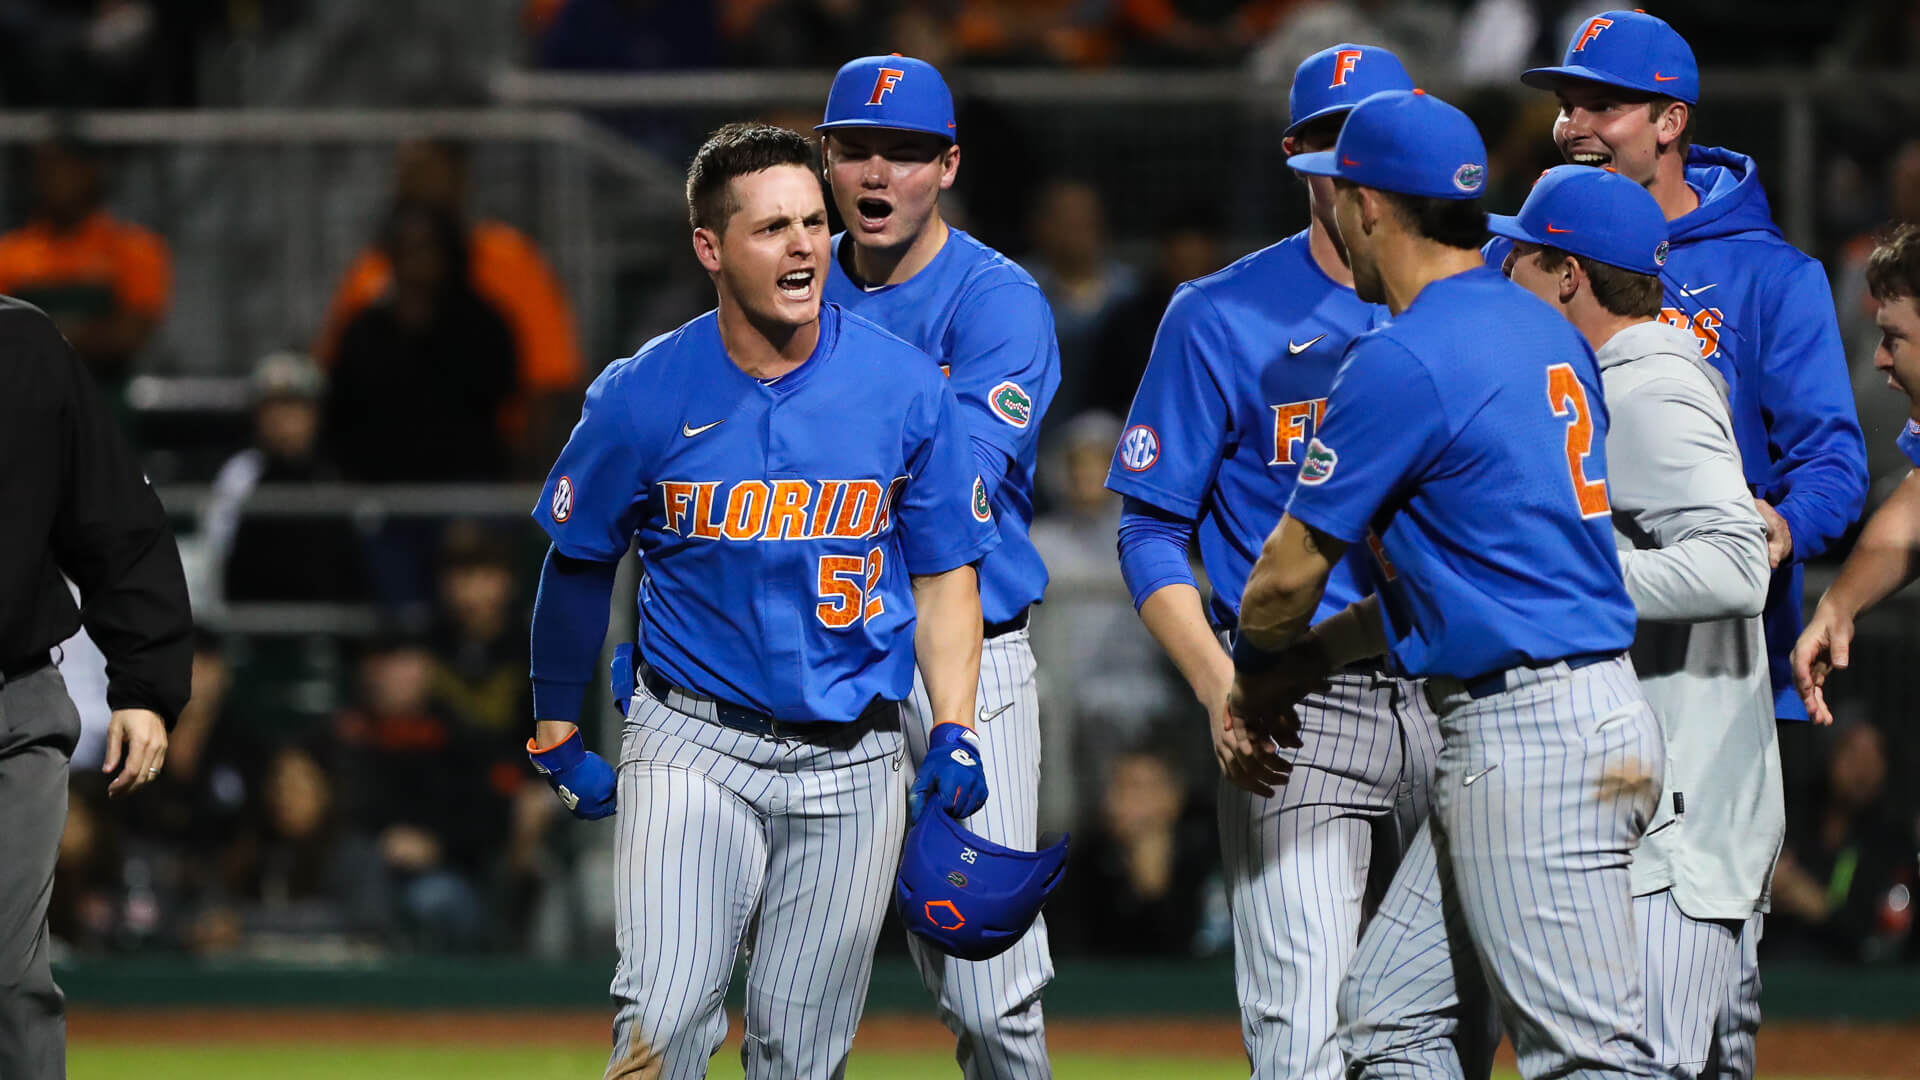 Gator baseball makes thunderous statement in sweep of Miami  In All